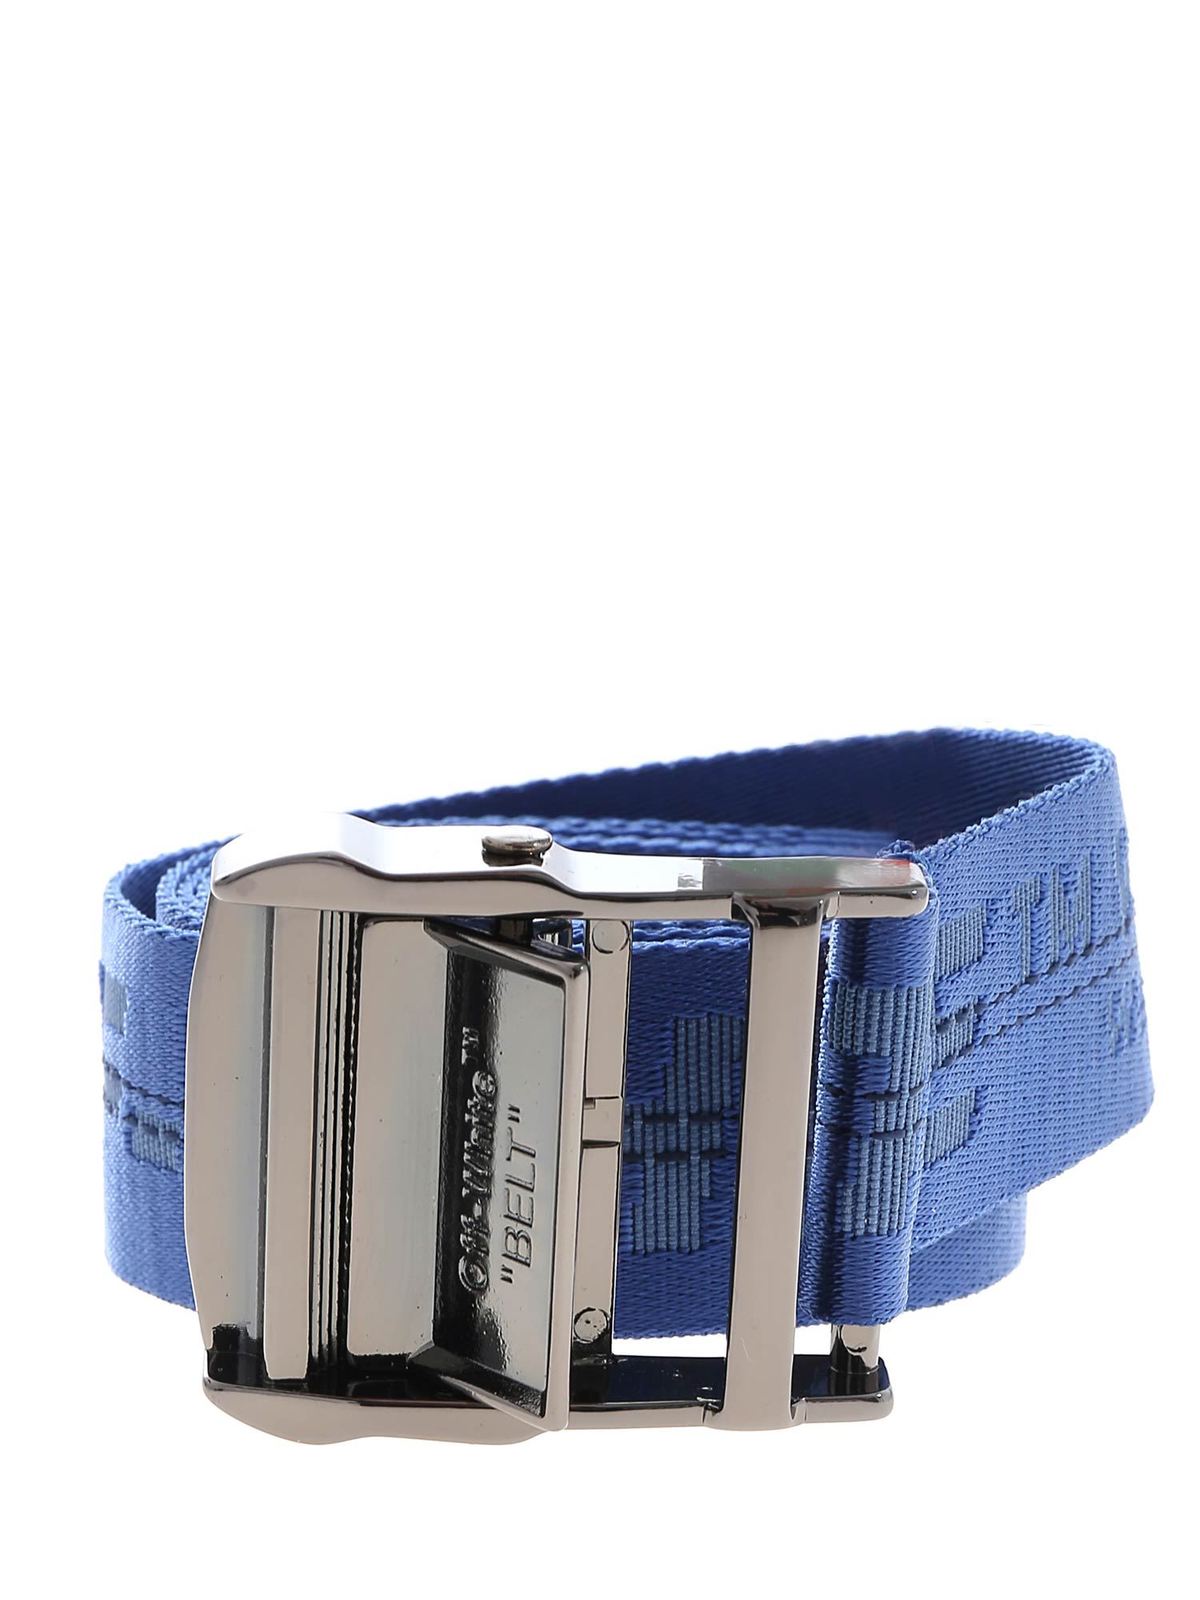 Belts Off-White - Classic Industrial belt in blue - OWRB009F192230833030